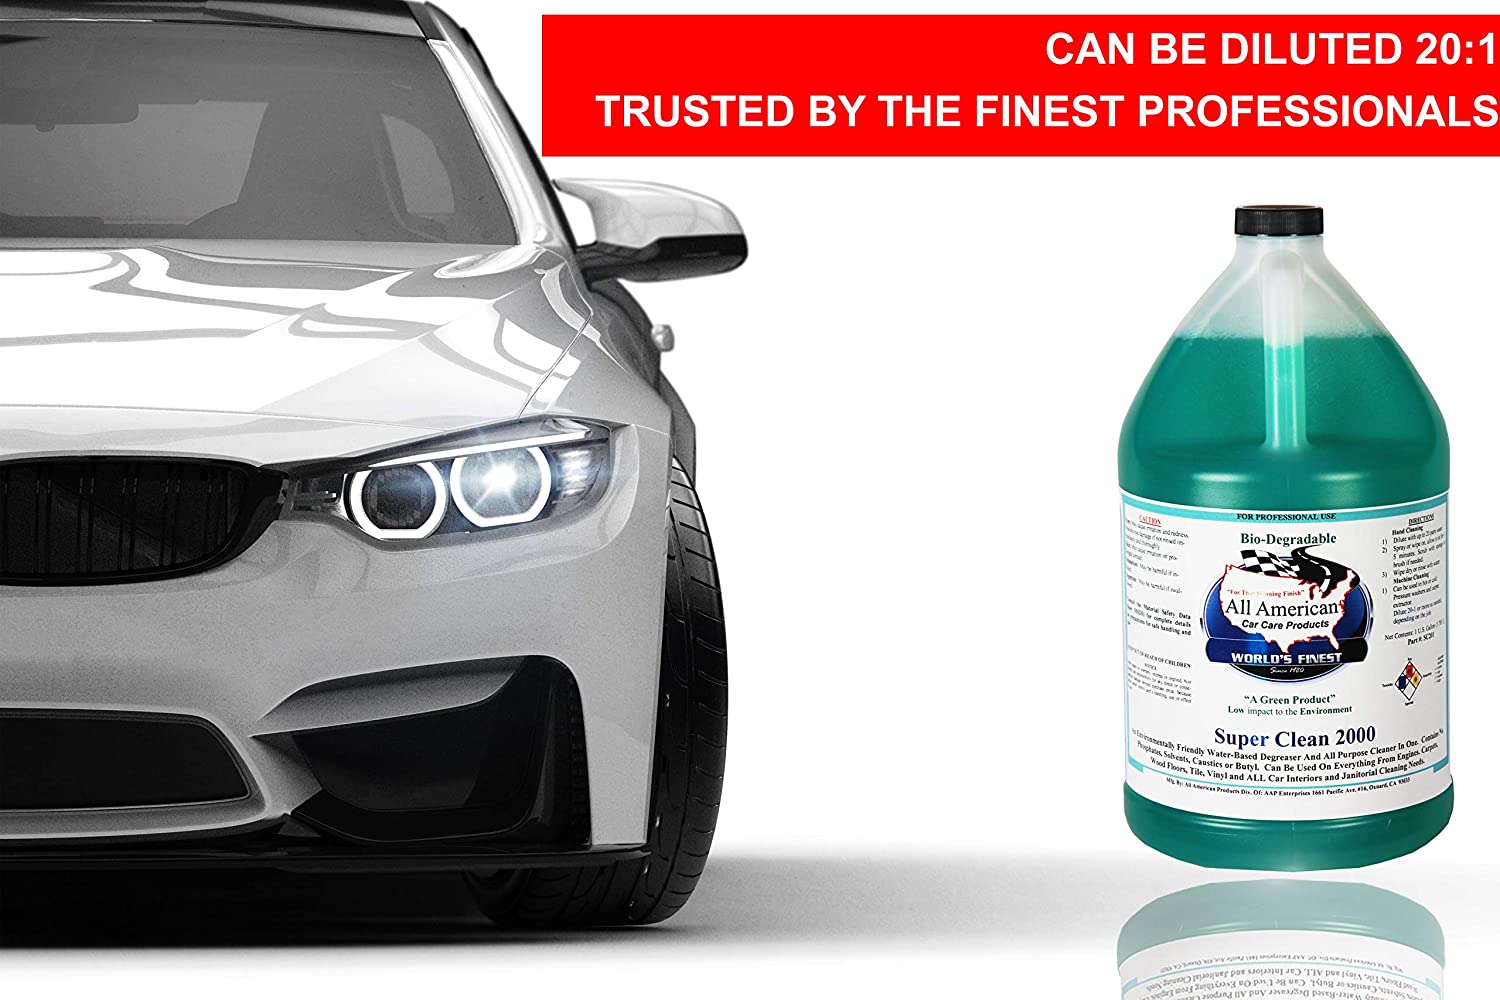 Why is it important to keep your car clean? – Diamondbrite